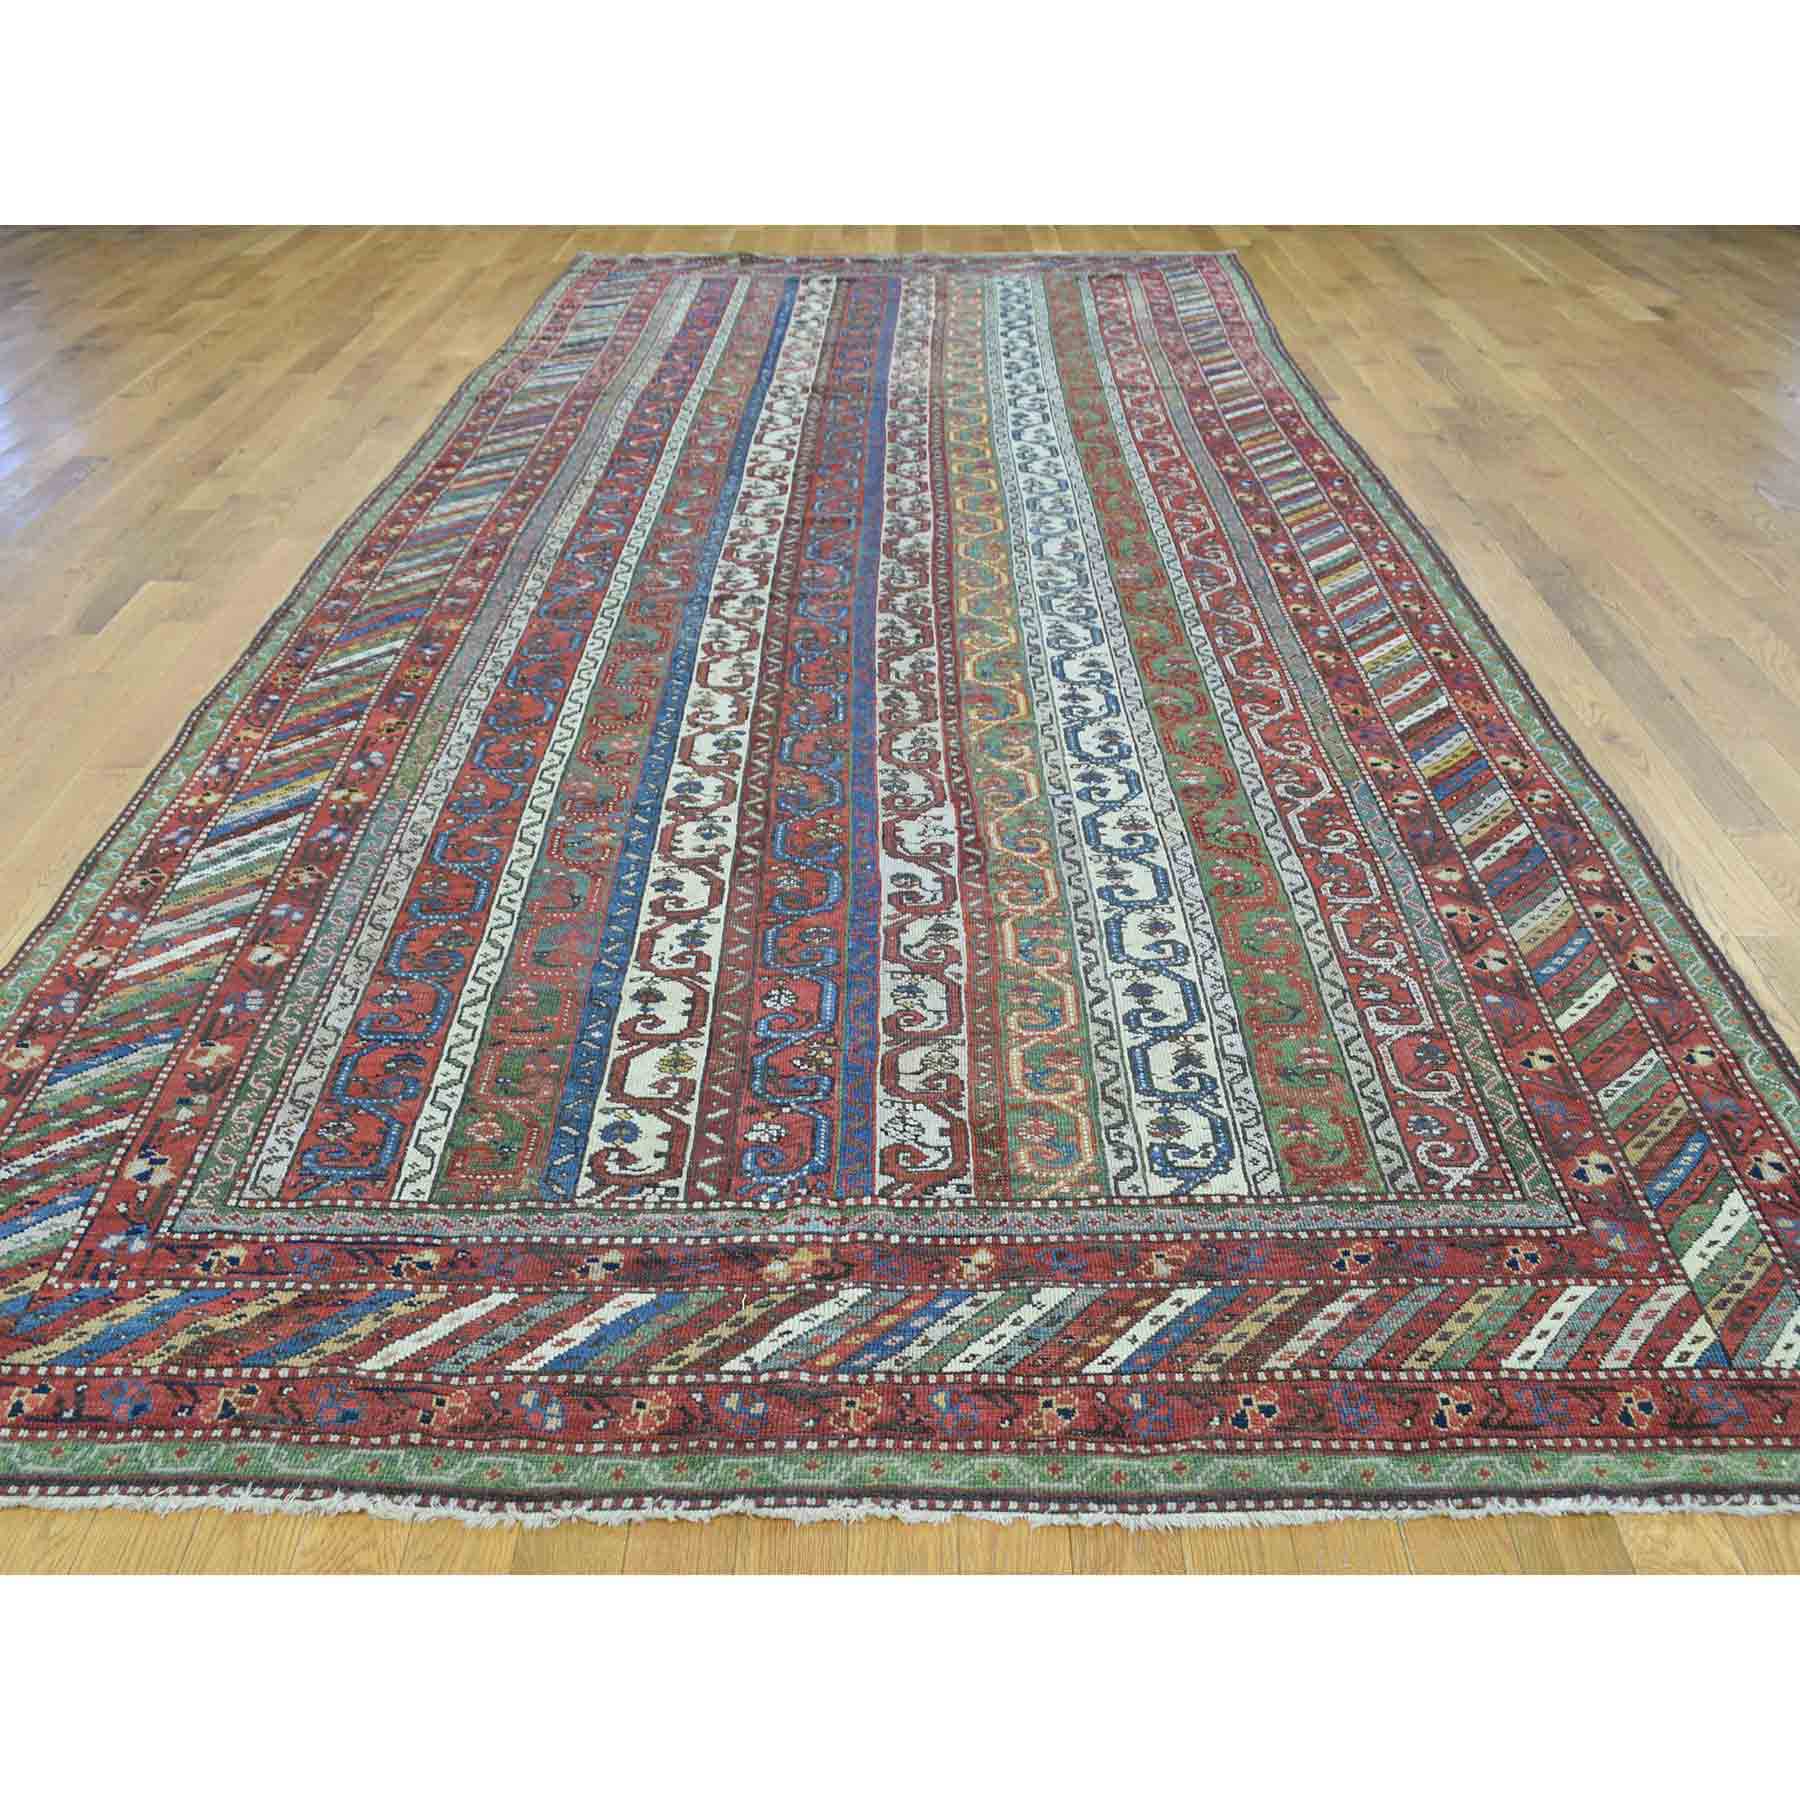 Antique-Hand-Knotted-Rug-172105